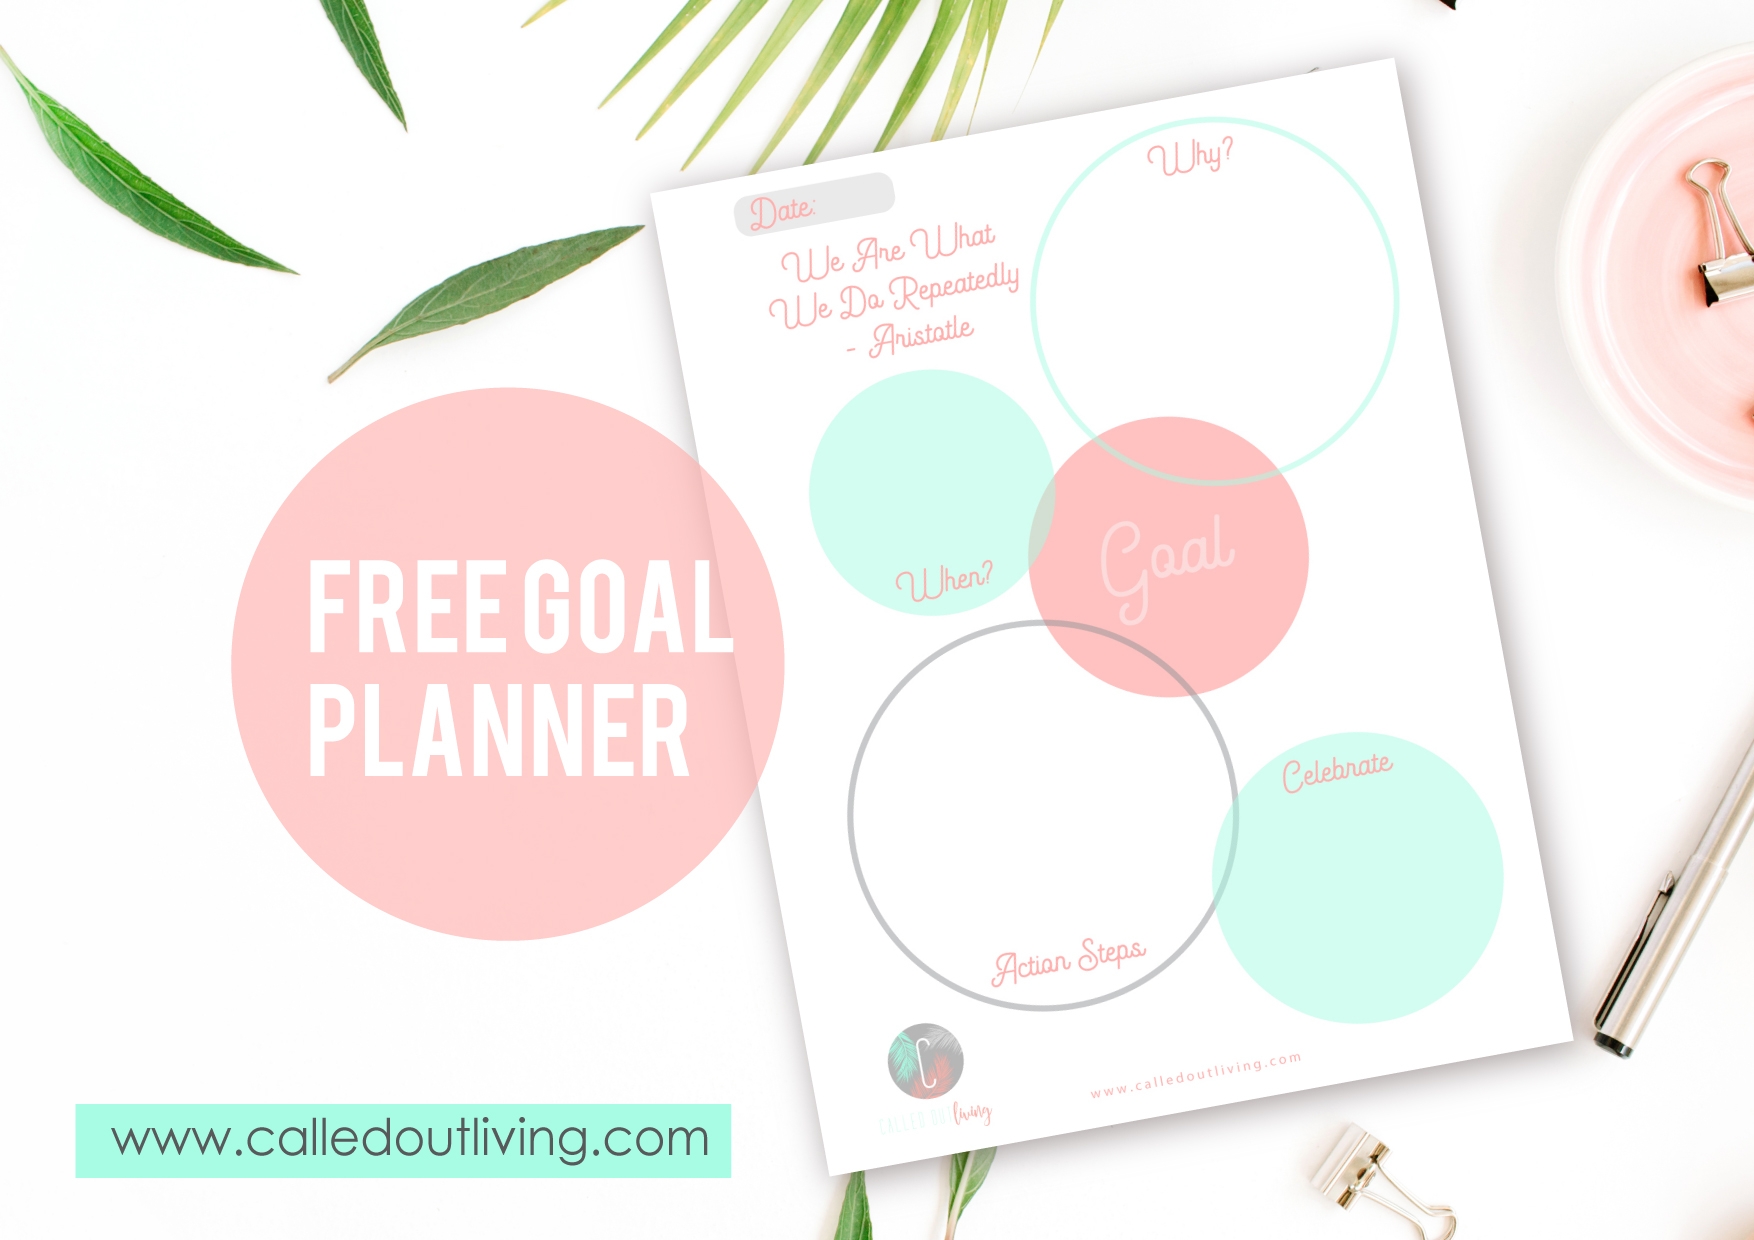 free goal planner, free printable planner, free goal planners, 2018 goal planner, success habits, daily habits, routines